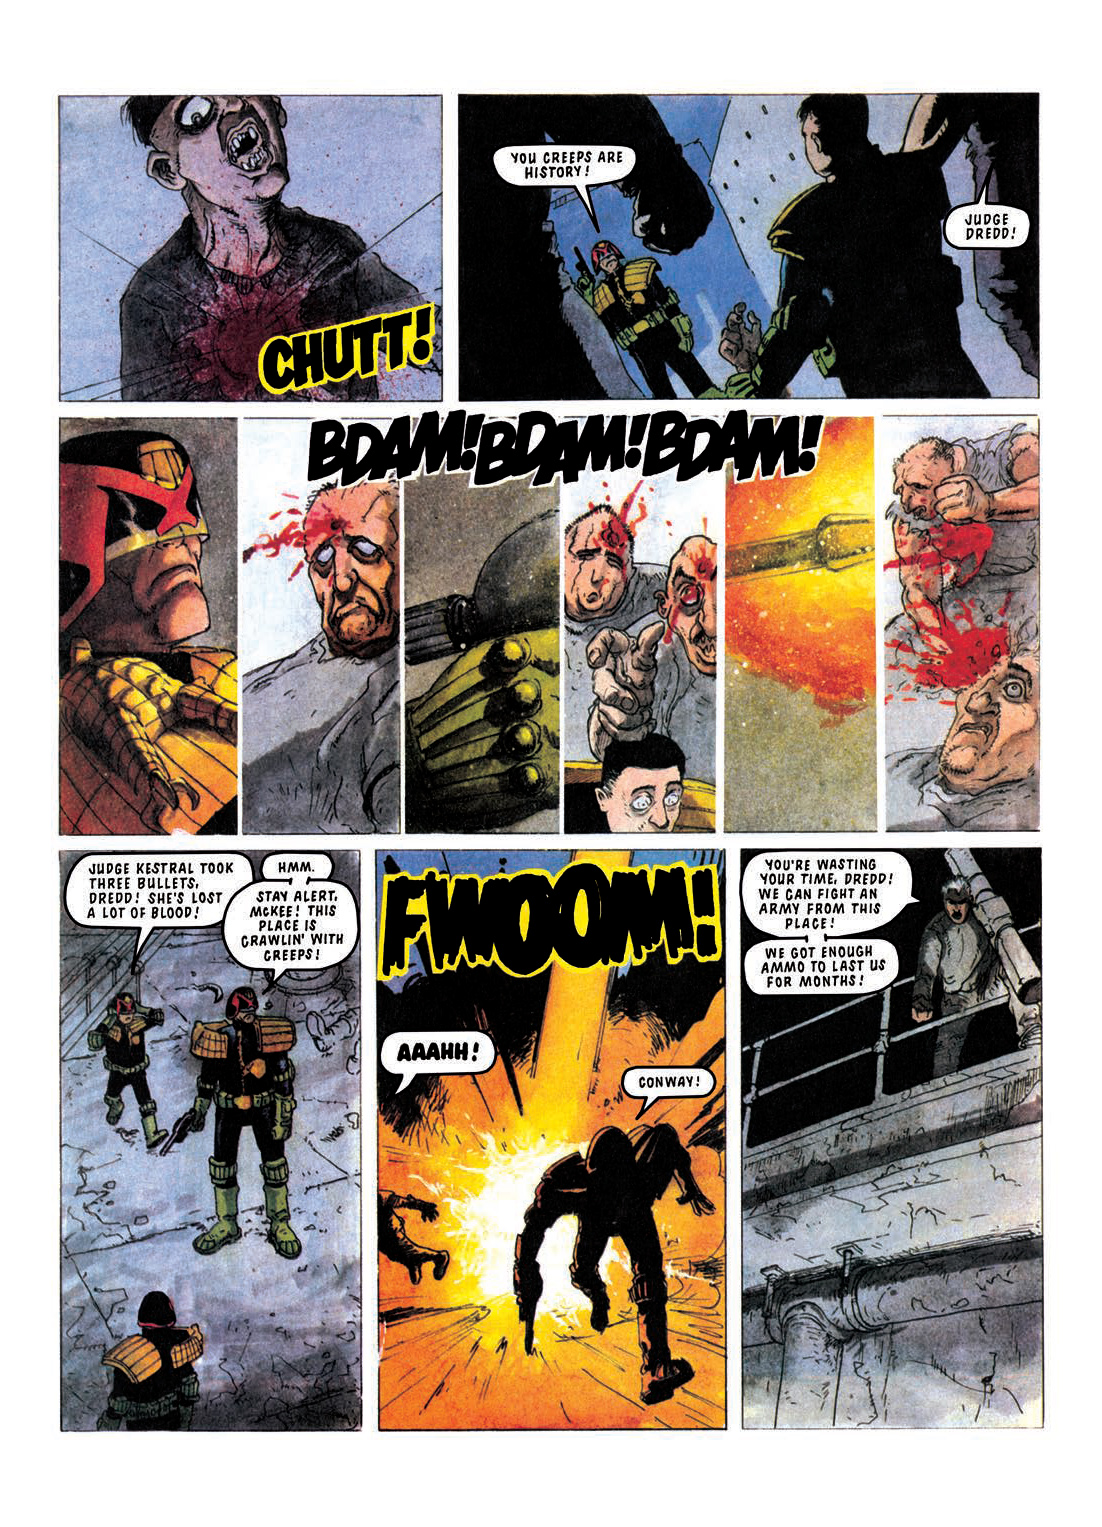 Read online Judge Dredd: The Restricted Files comic -  Issue # TPB 4 - 17